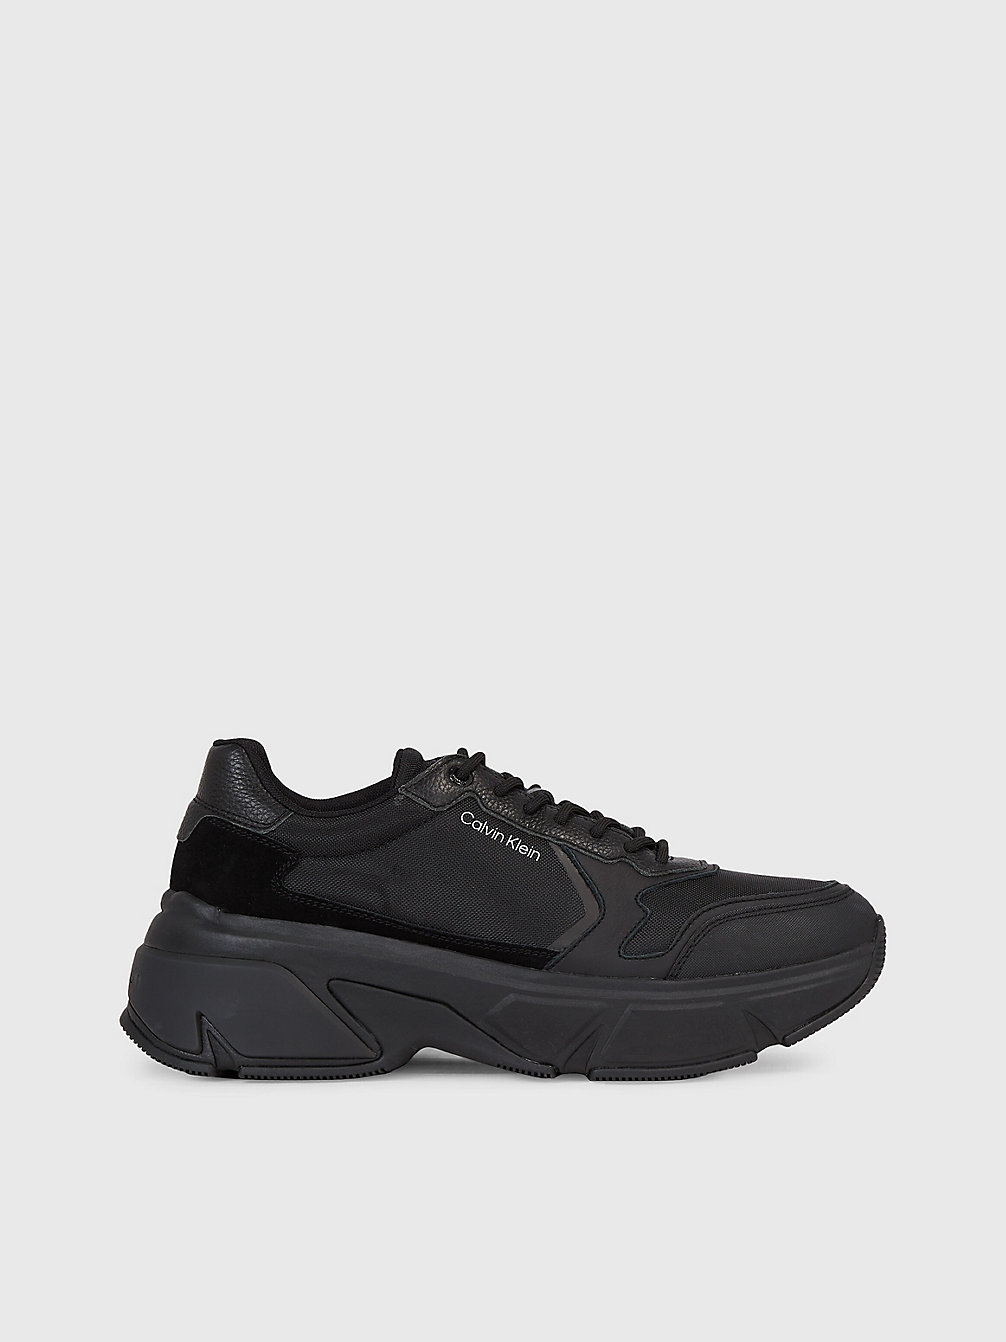 TRIPLE BLACK Leather Chunky Trainers undefined men Calvin Klein